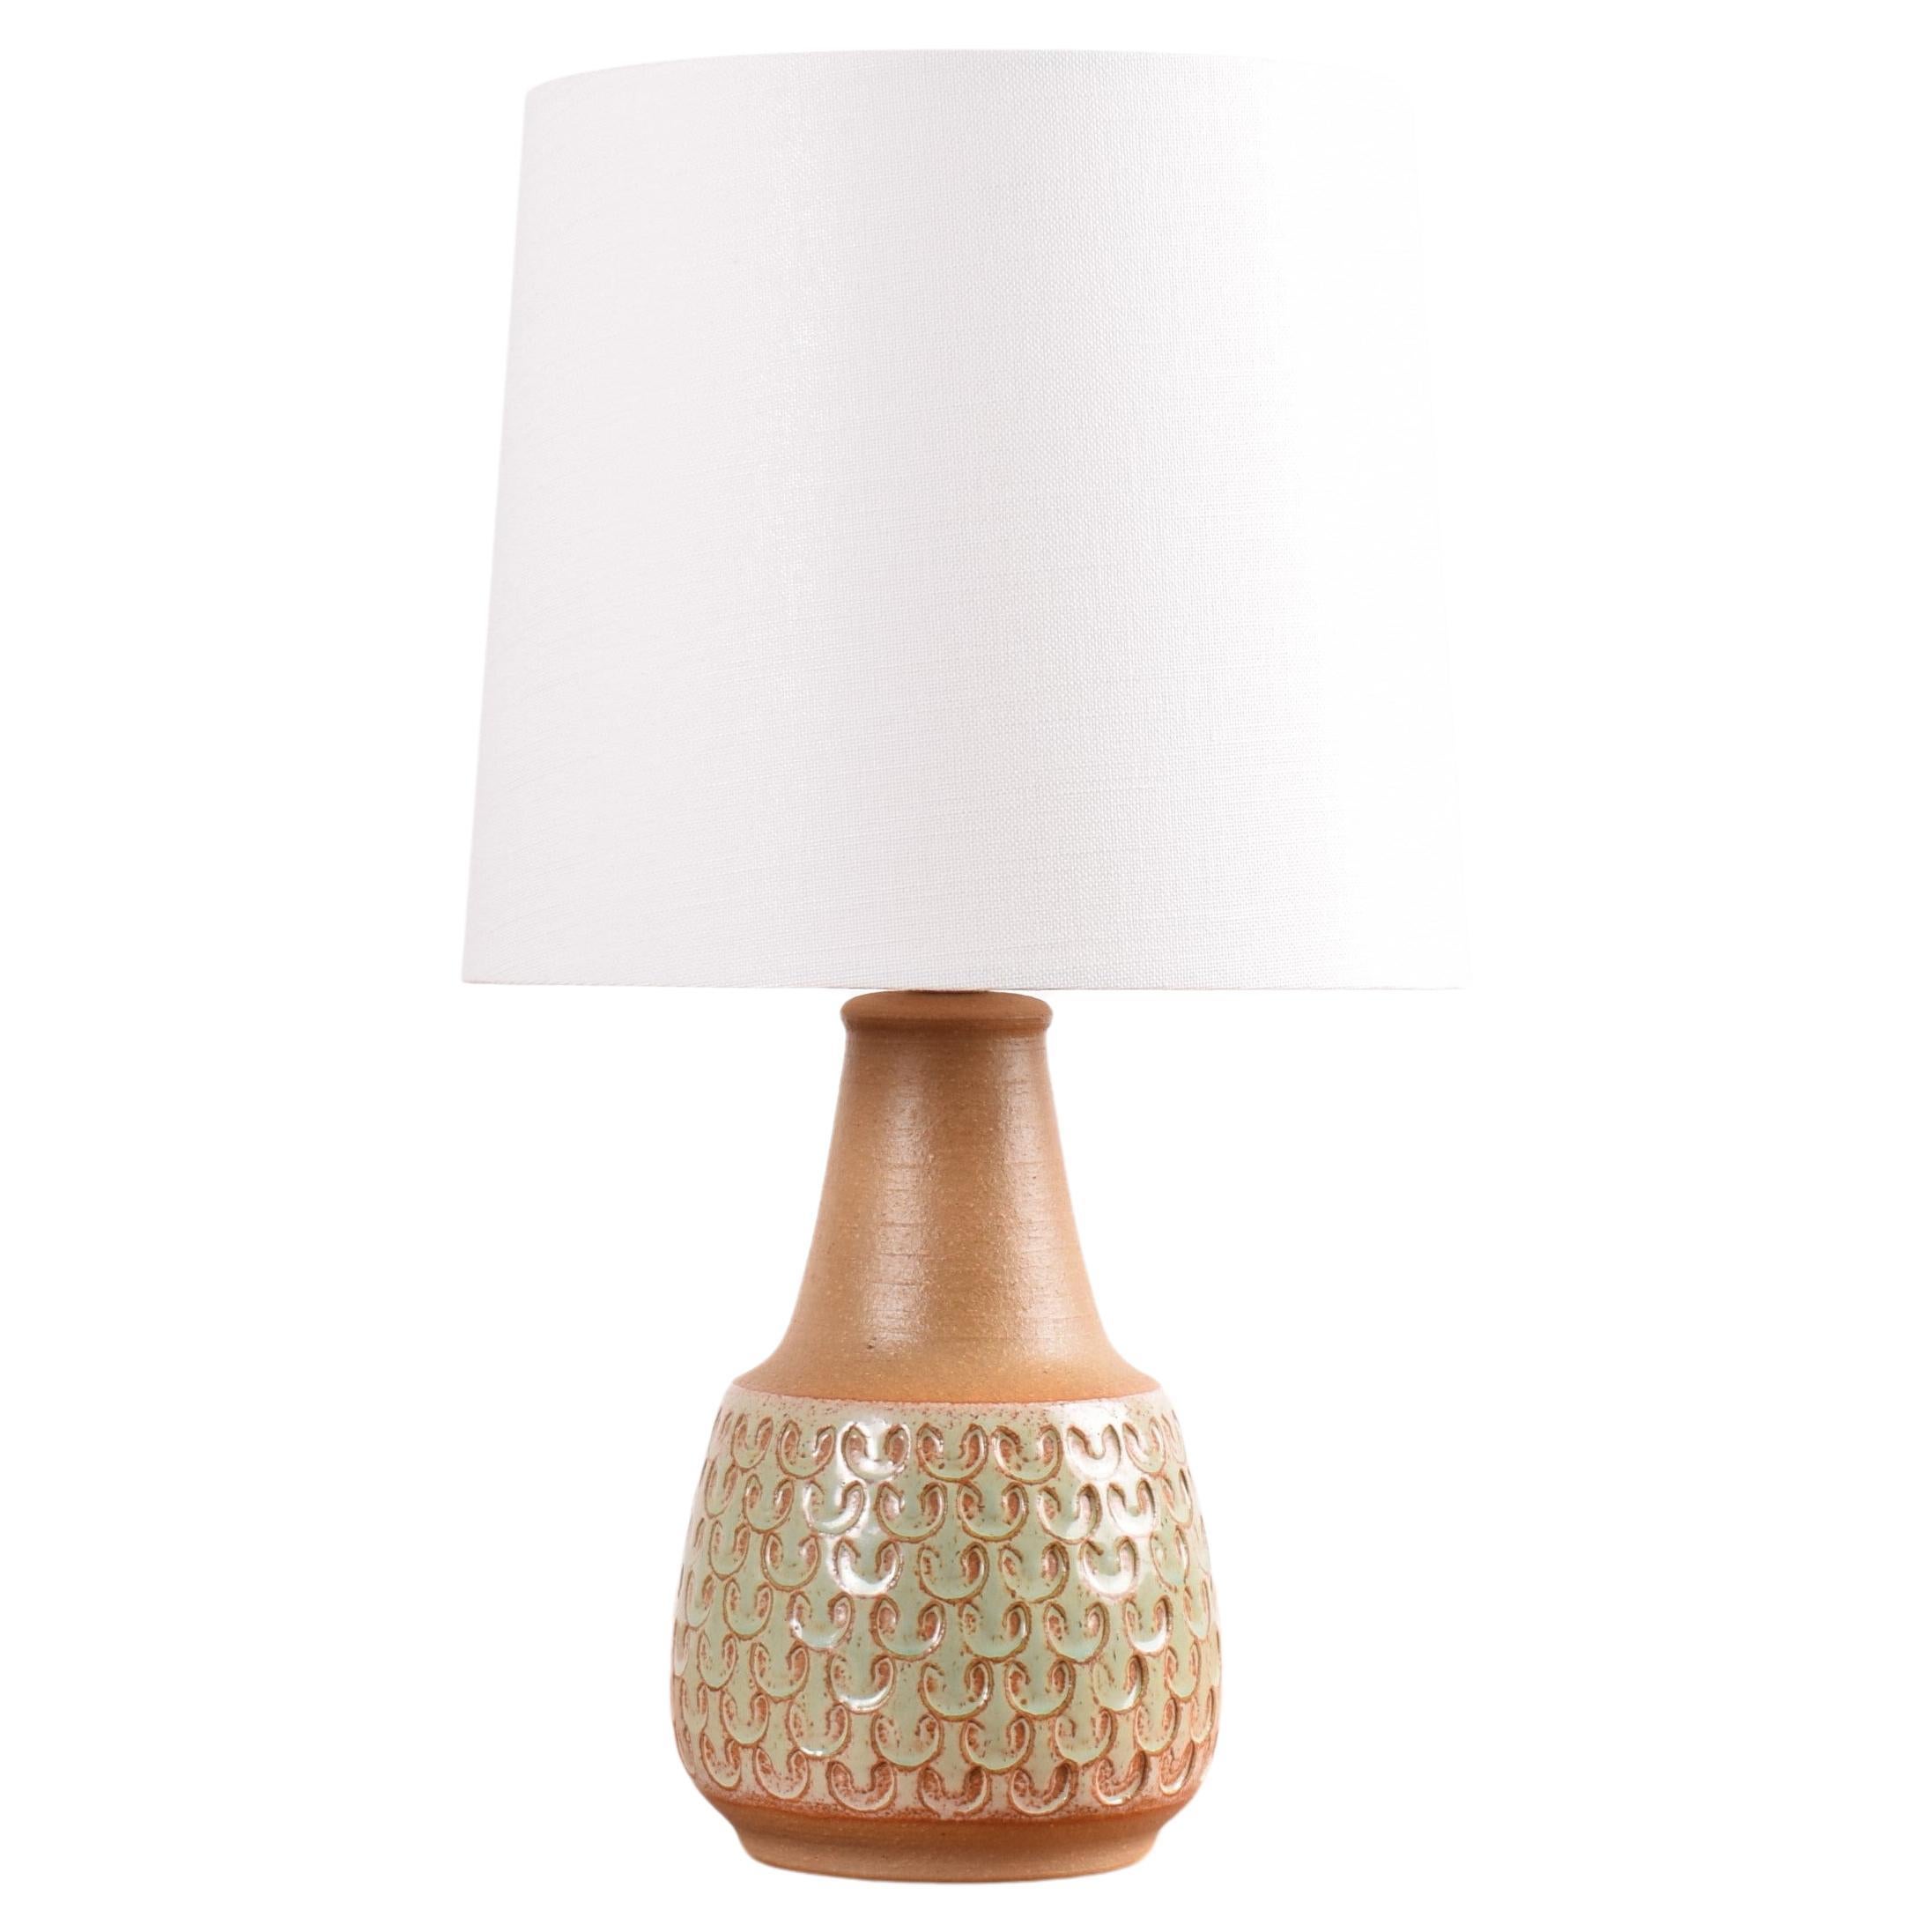 Danish Midcentury Søholm Ceramic Table Lamp Pale Green and Brown, 1960s